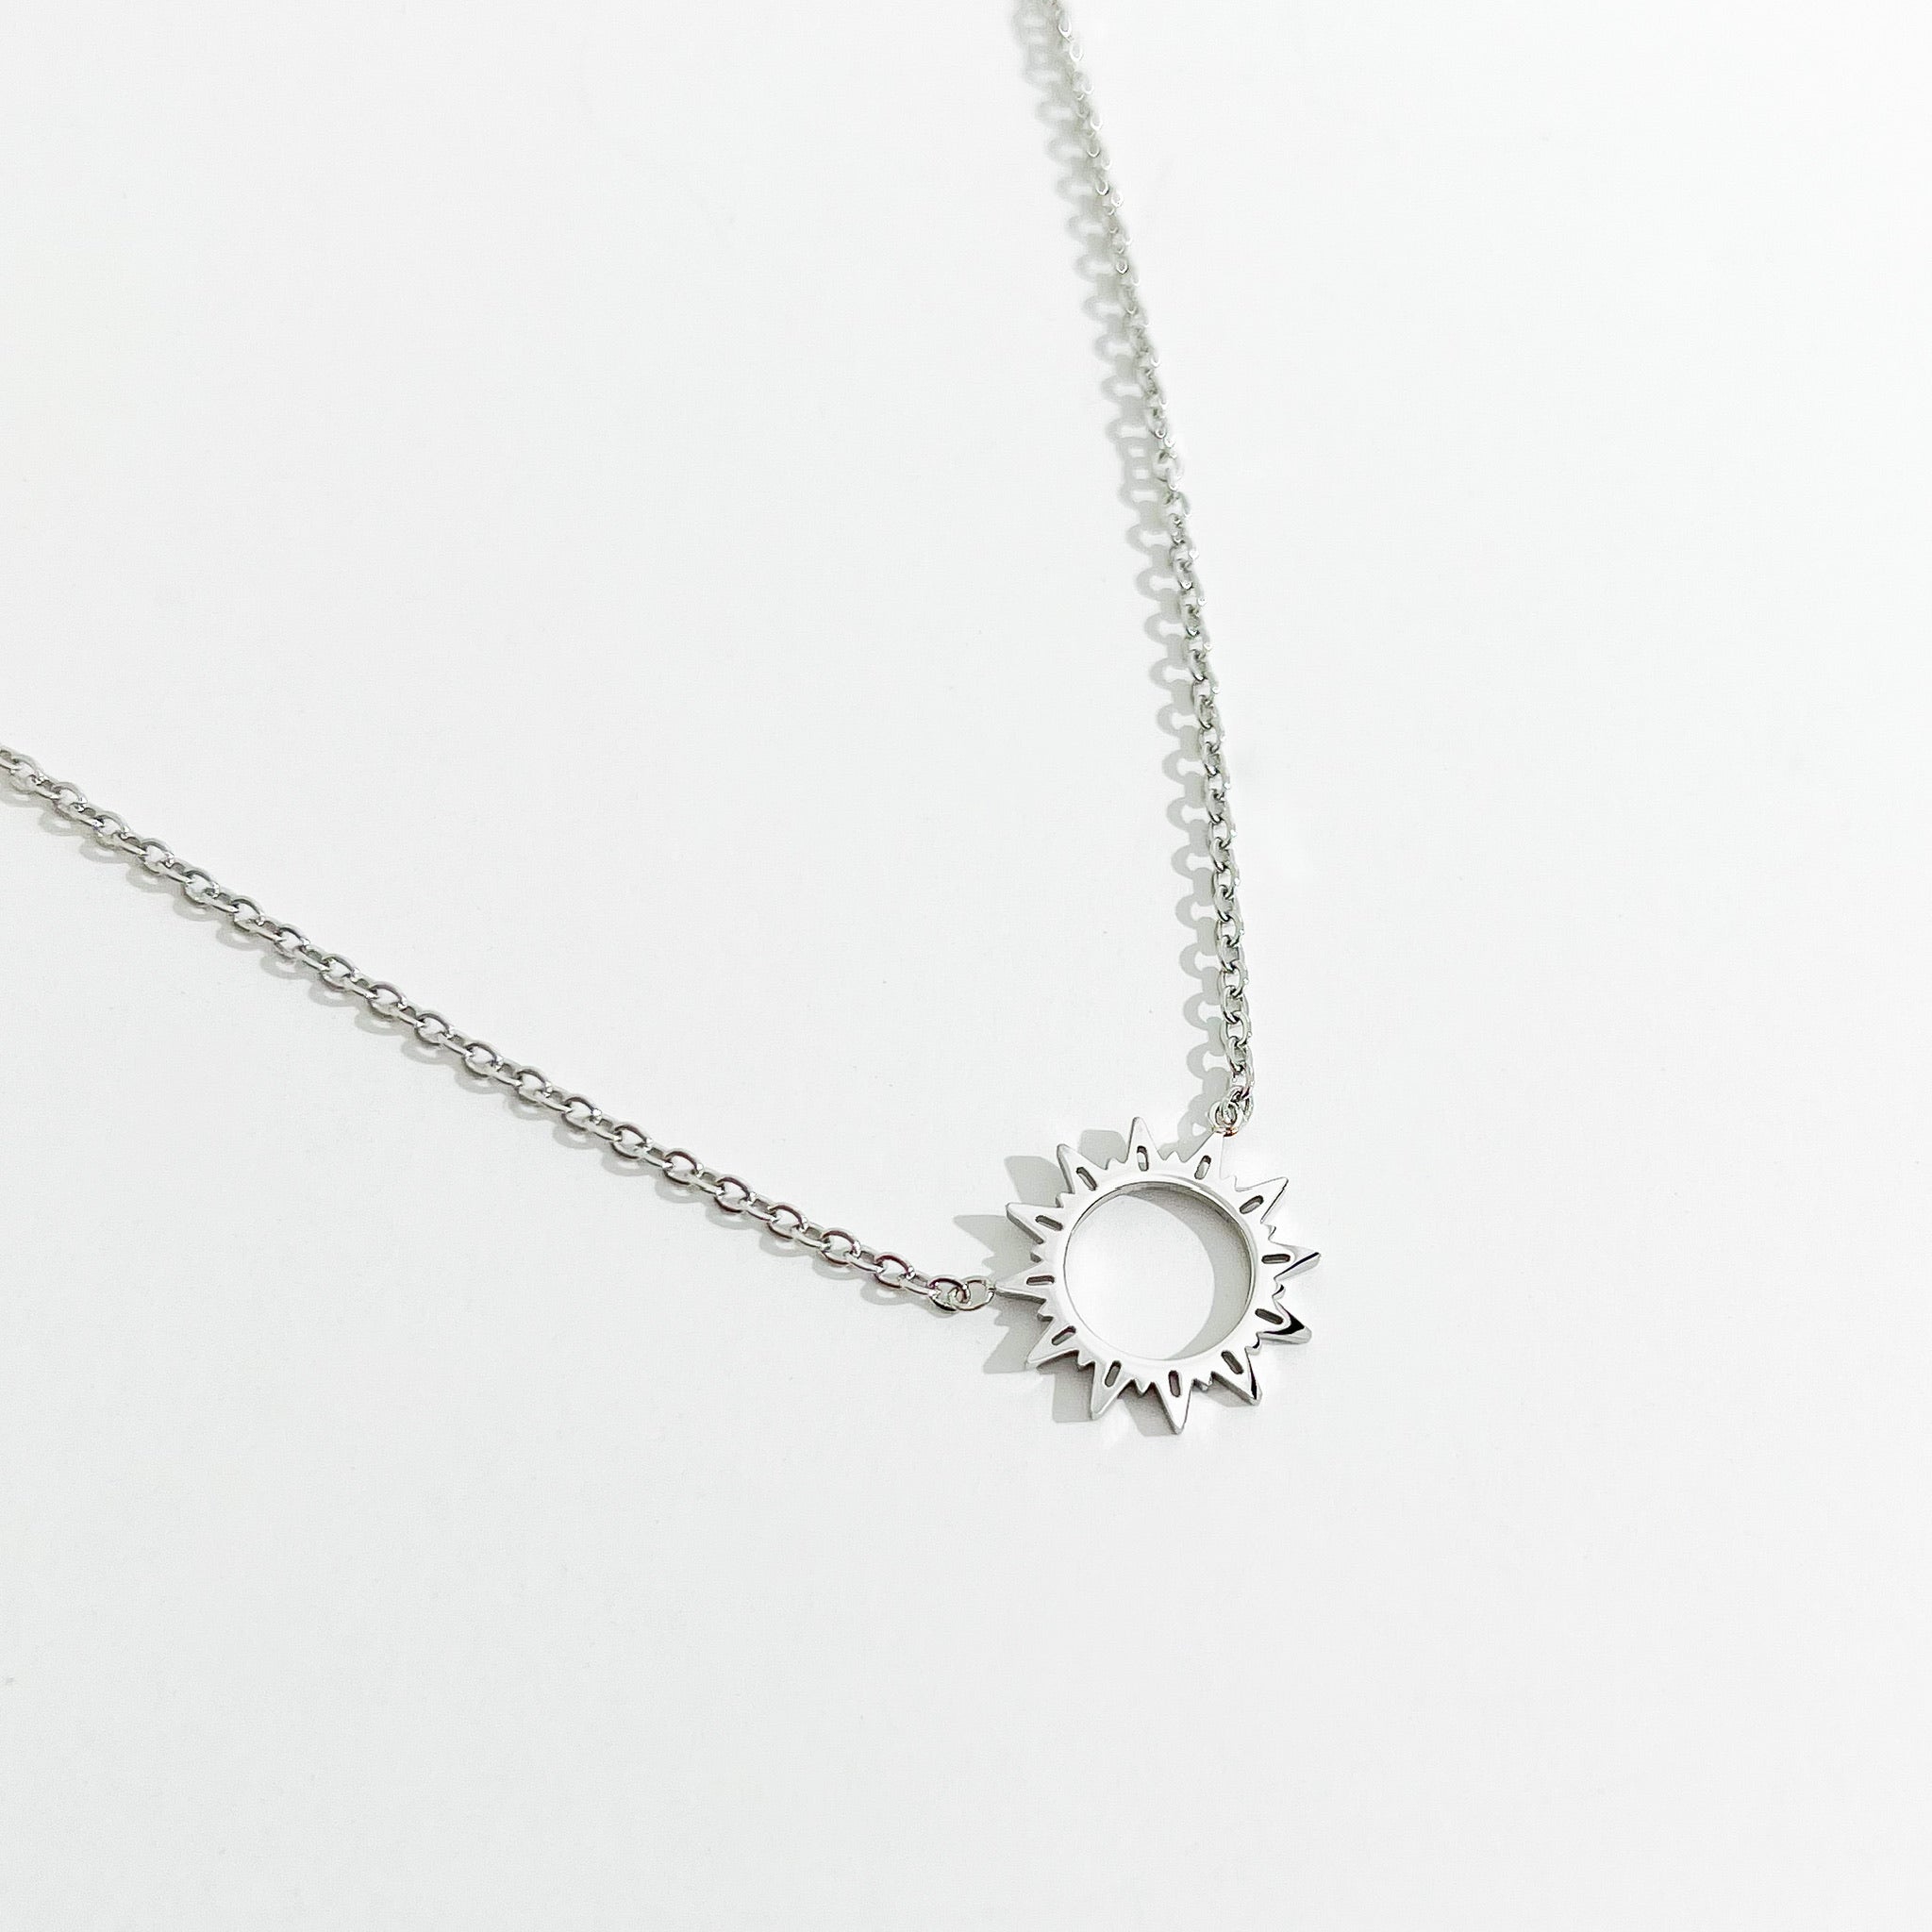 Sunburst Necklace in Silver - Flaire & Co.